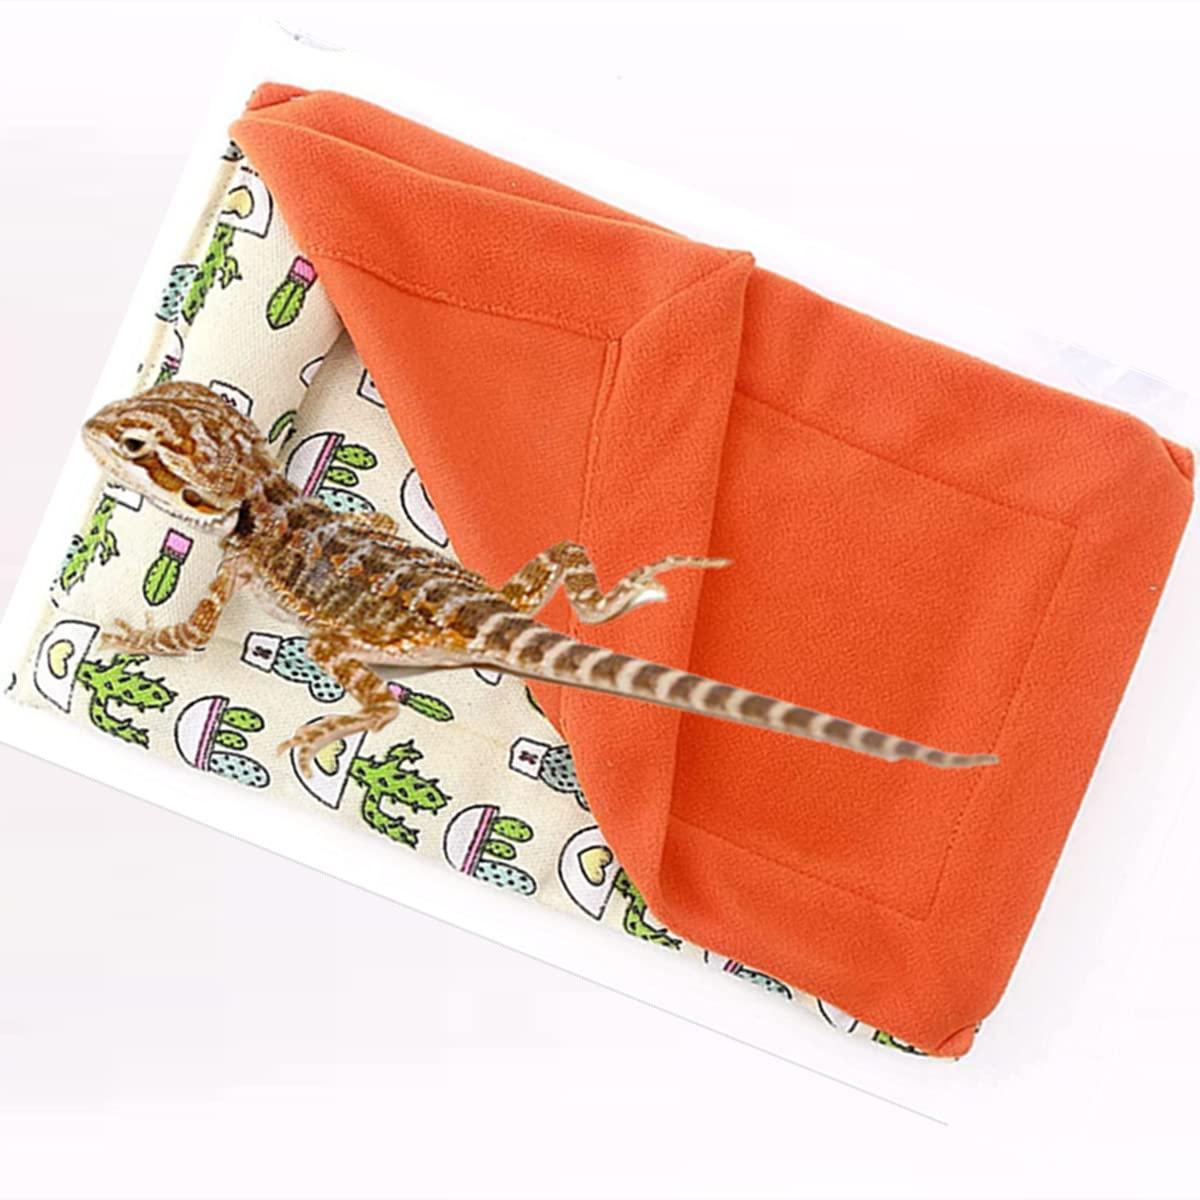 SEAPANHE Bearded Dragon Bed Set - Reptile Sleeping Bag - Reptile Bed with Pillow and Blanket - Super Soft Premium cotton Filling - Breathable Skin Friendly Bearded Dragon Bed for Basking